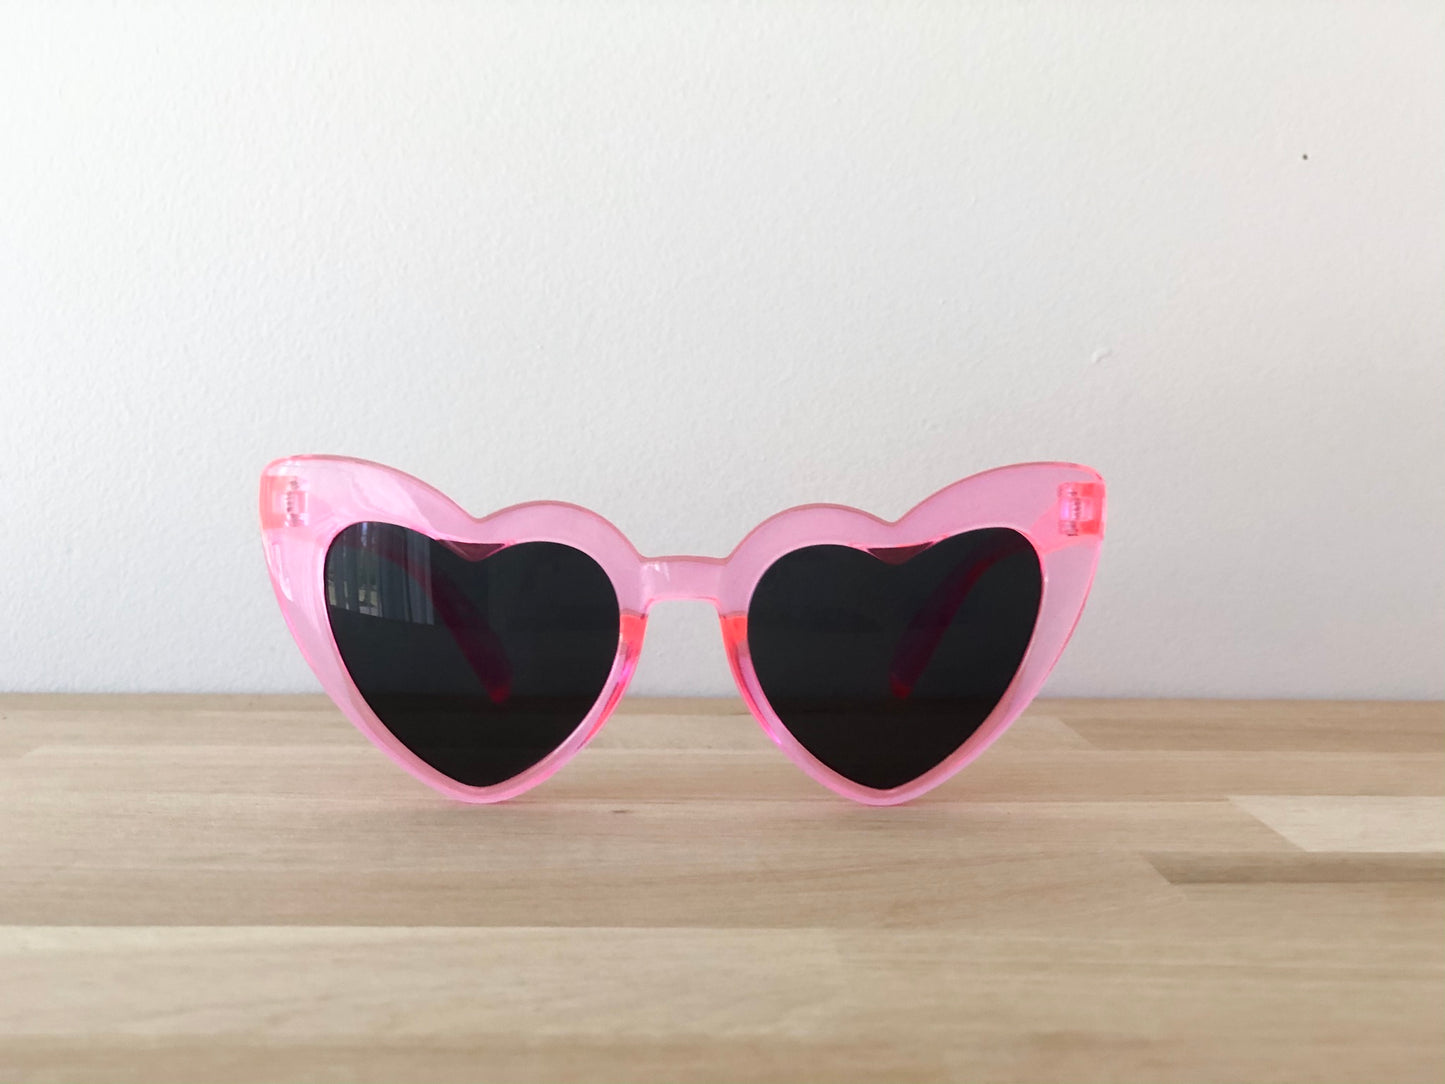 Sunglasses Heart - Pink Flamingo - Playful heart-shaped sunglasses in pink by Sadie Baby 